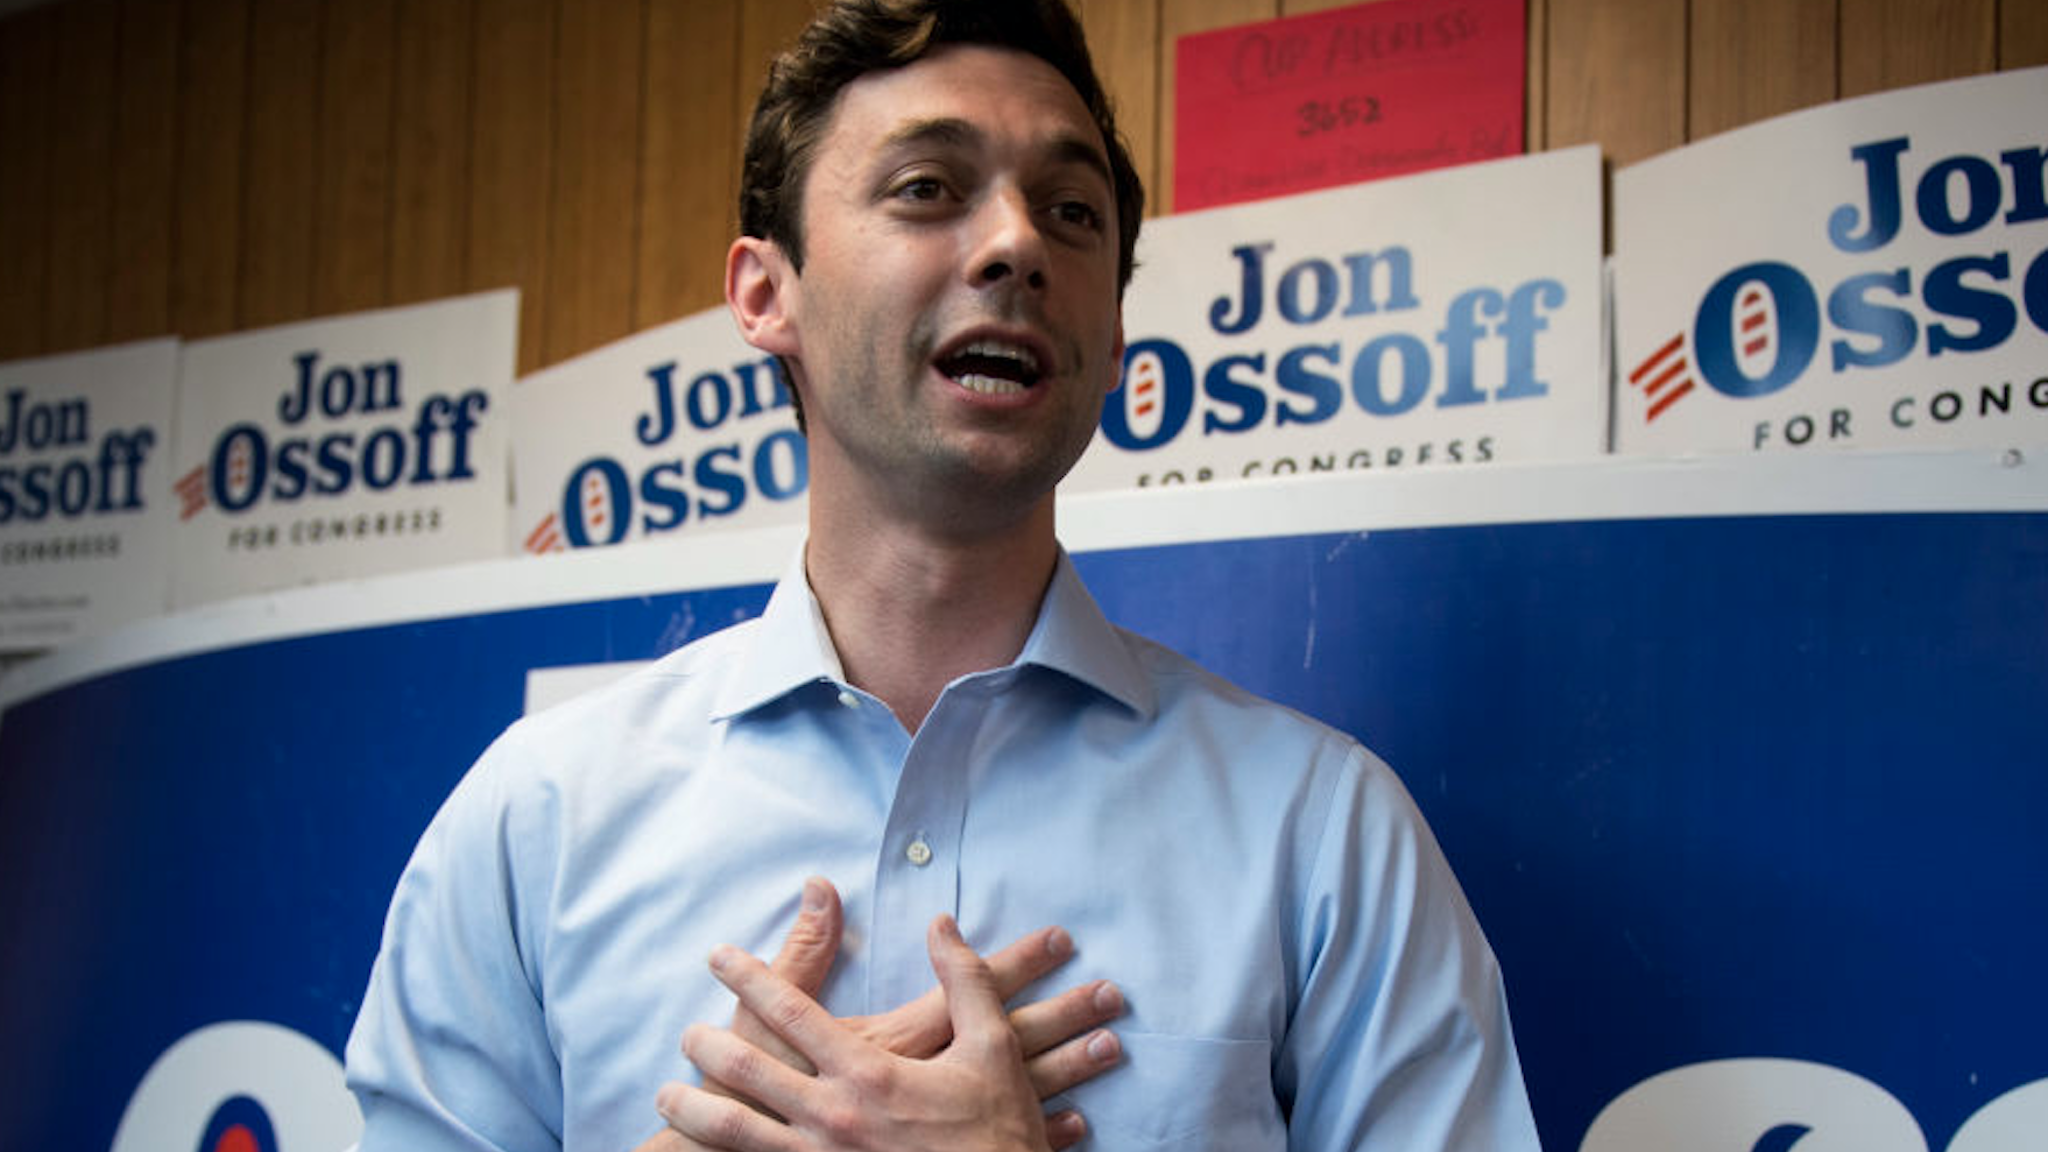 Democratic candidate for Georgia's 6th Congressional district Jon Ossoff speaks to campaign workers and volunteers at his campaign office in Chamblee, Ga., on Sunday, June 18, 2017. Ossify is facing off against Republican Karen Handel in the special election to fill the seat vacated by current HHS Secretary Tom Price will be held on Tuesday.